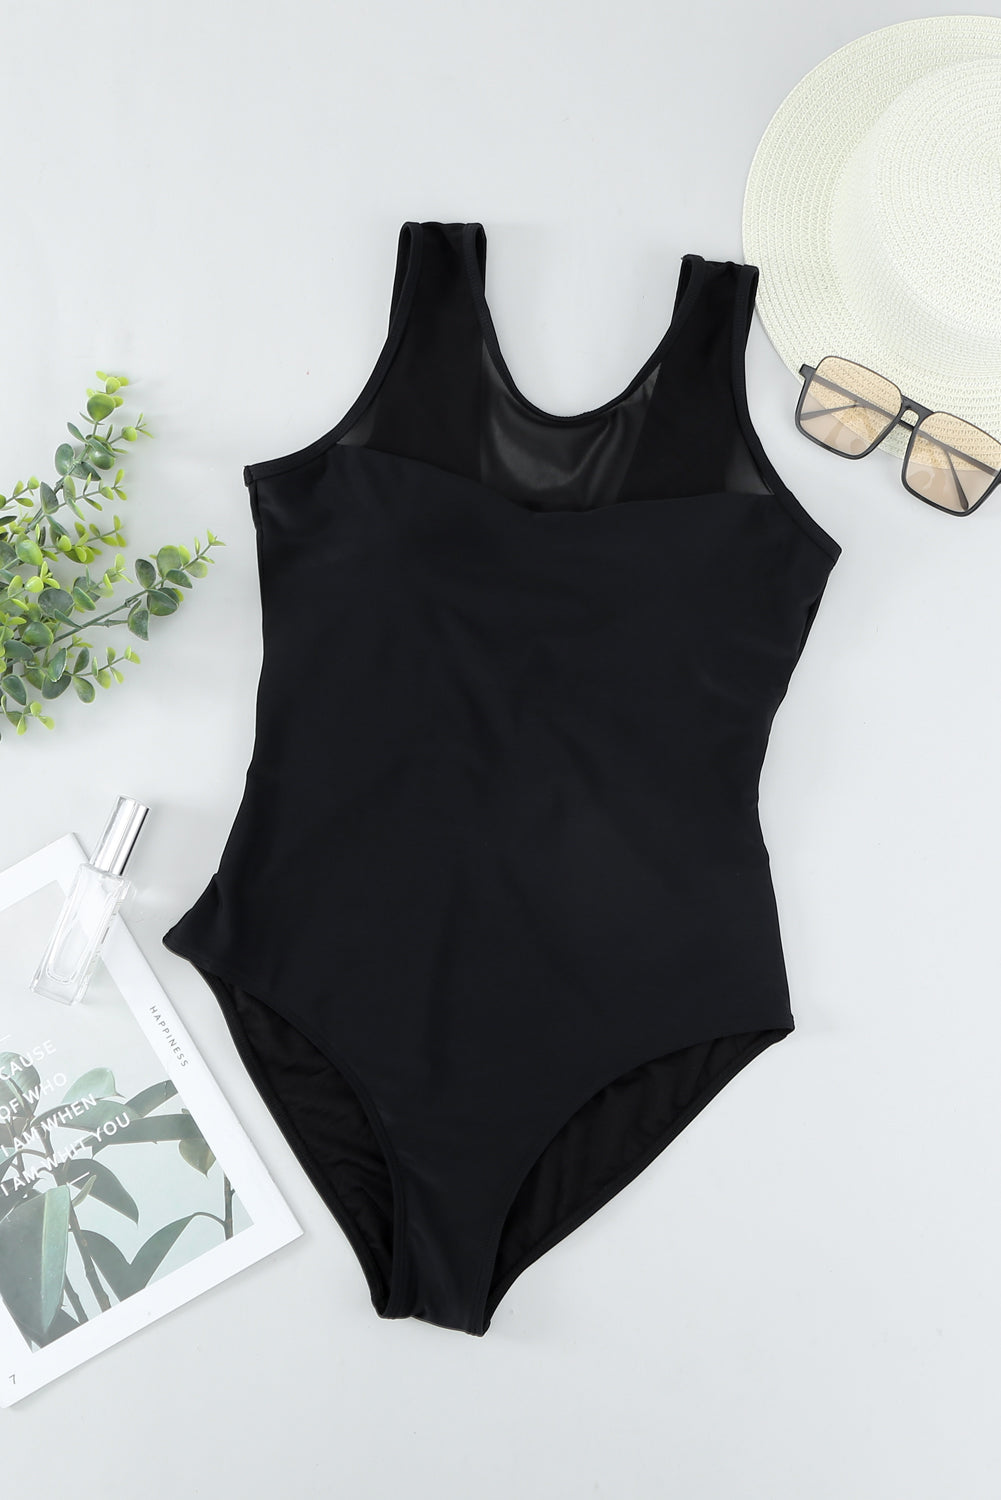 Black Hollow Out Back Mesh High Leg One Piece Swimsuit